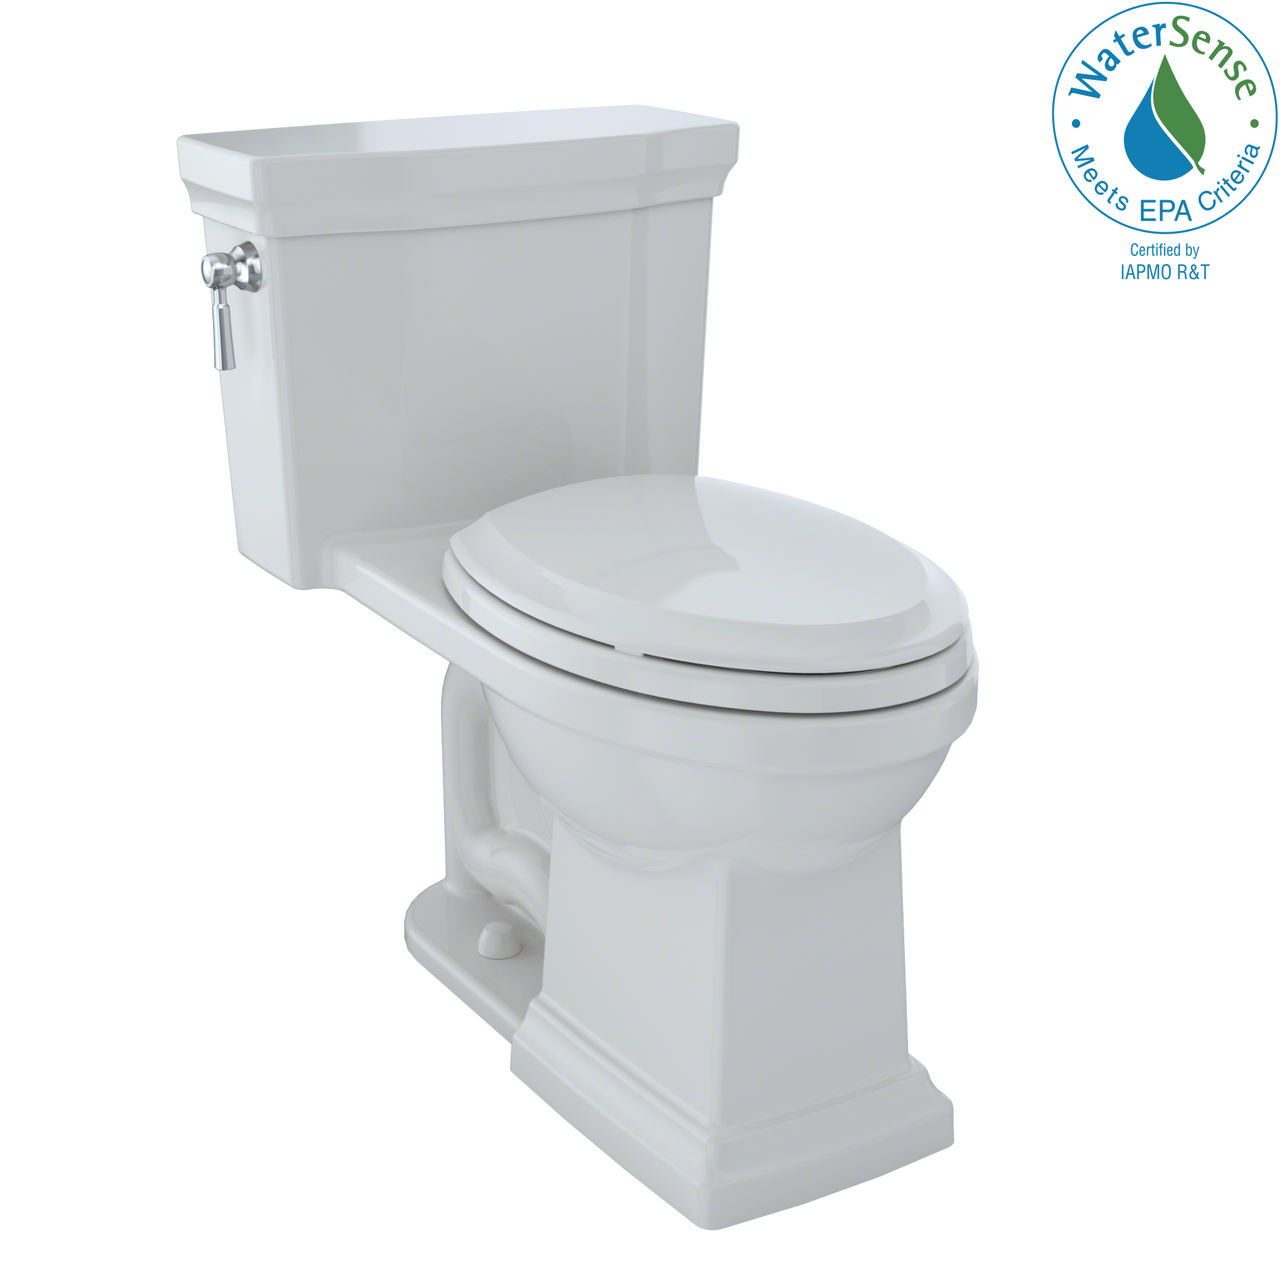 TOTO Promenade II One-Piece Elongated 1.28 GPF Universal Height Toilet with CeFiONtect,   - MS814224CEFG#11 - BNGBath